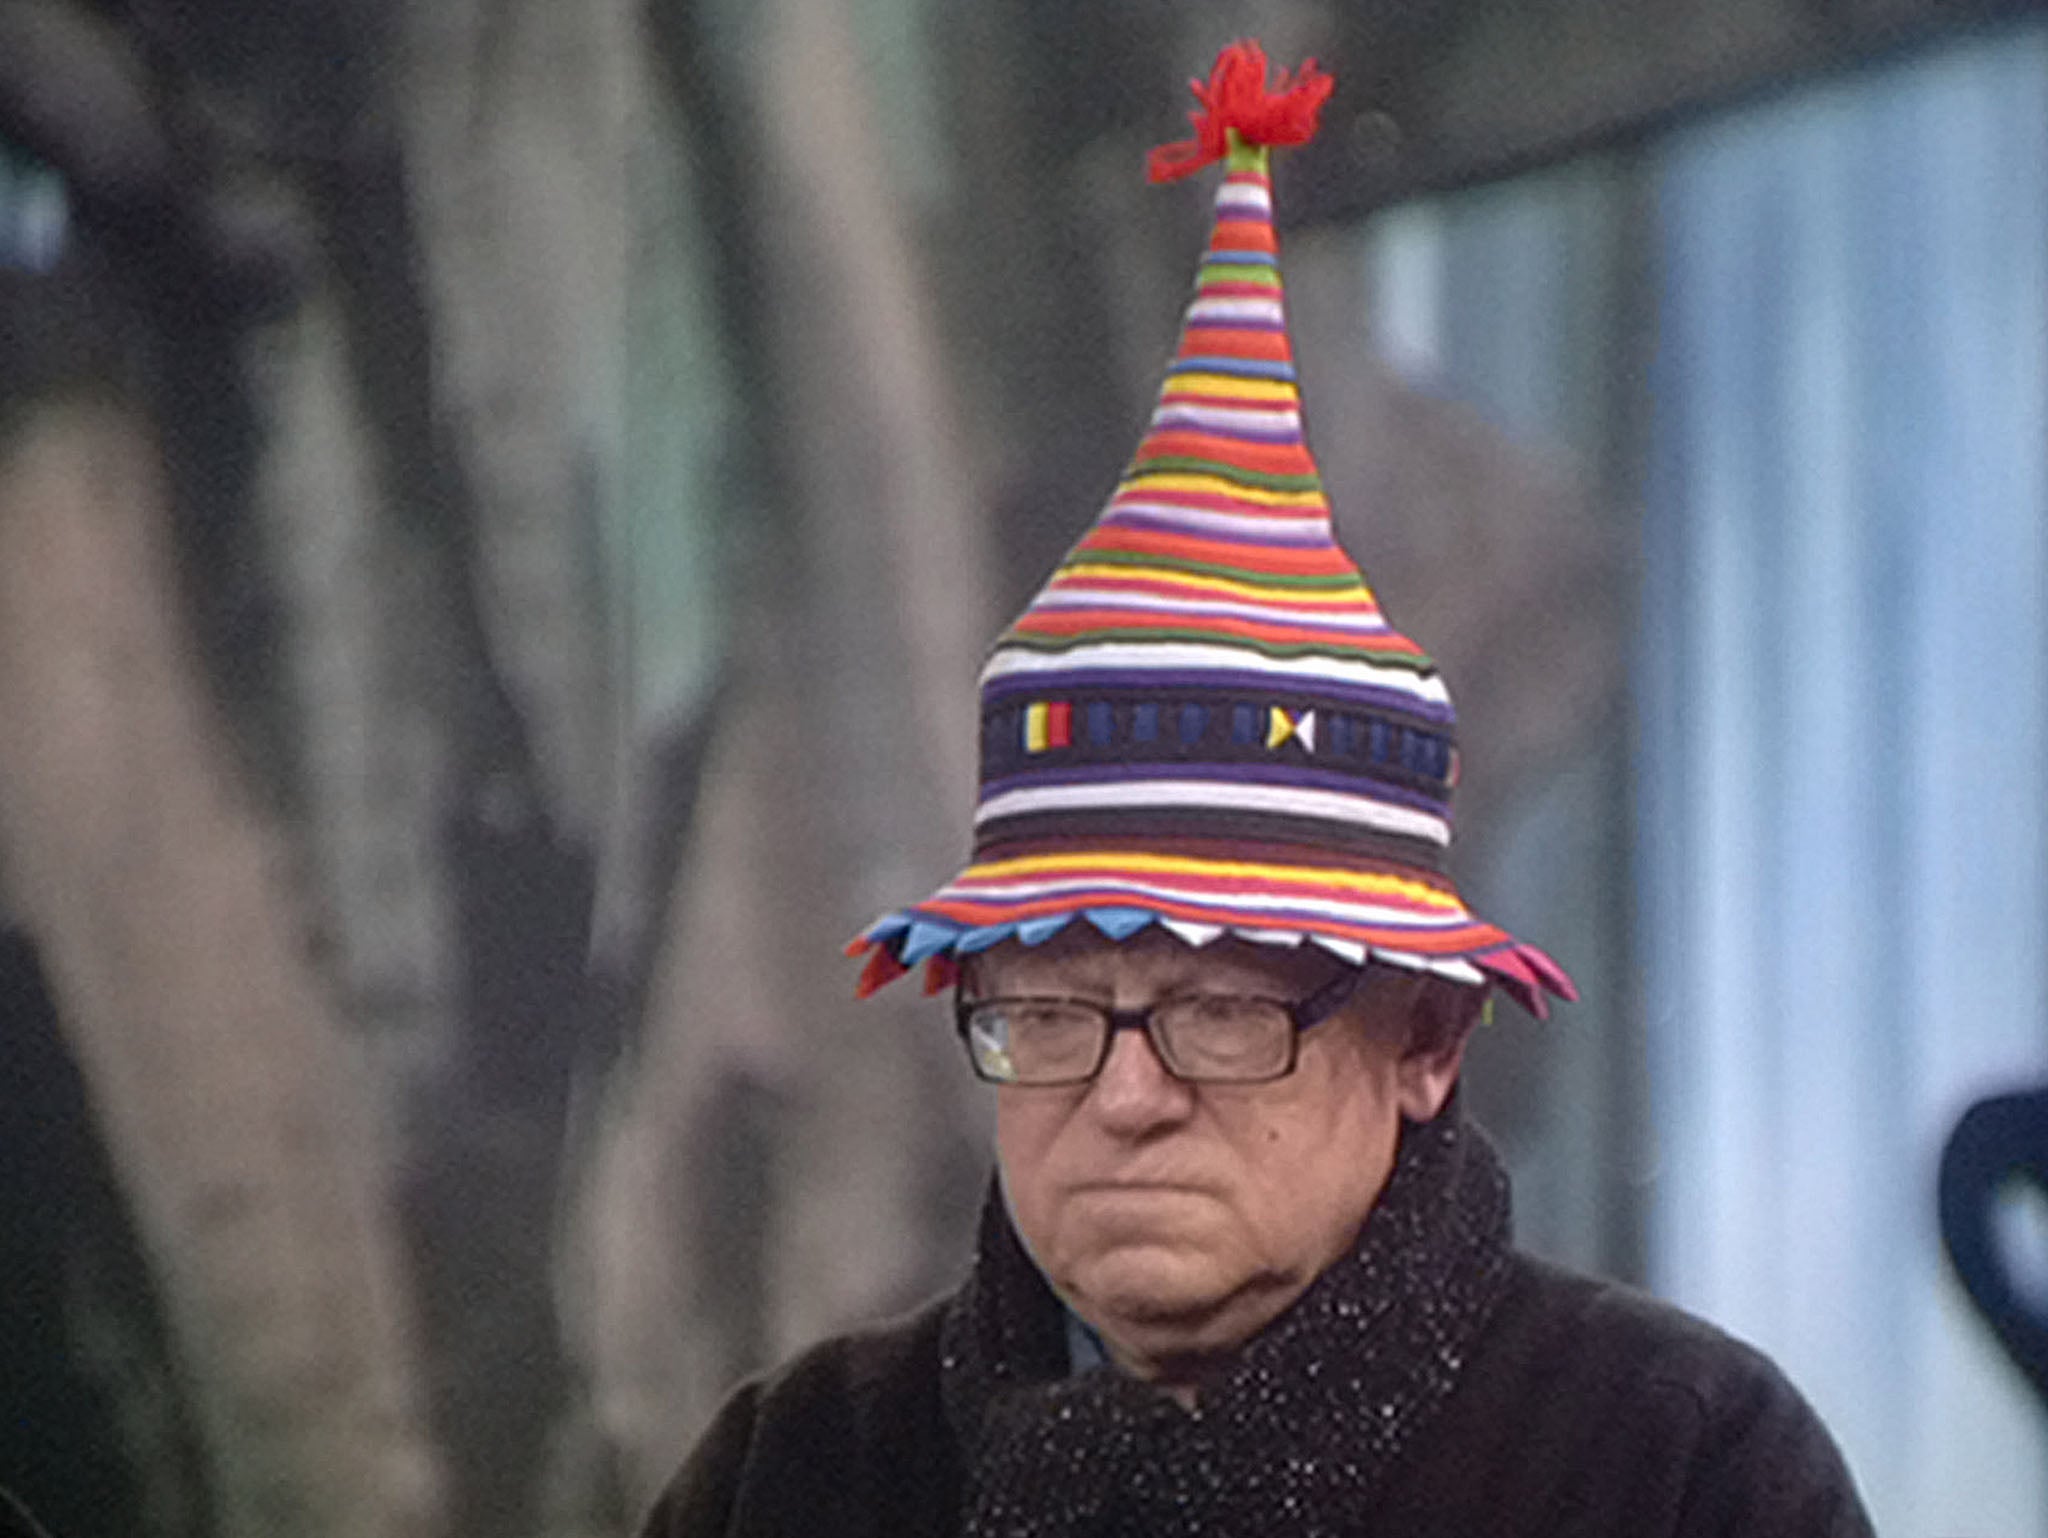 Ken Morley Apologises To Celebrity Big Brother Viewers After Removal But Denies Being Racist